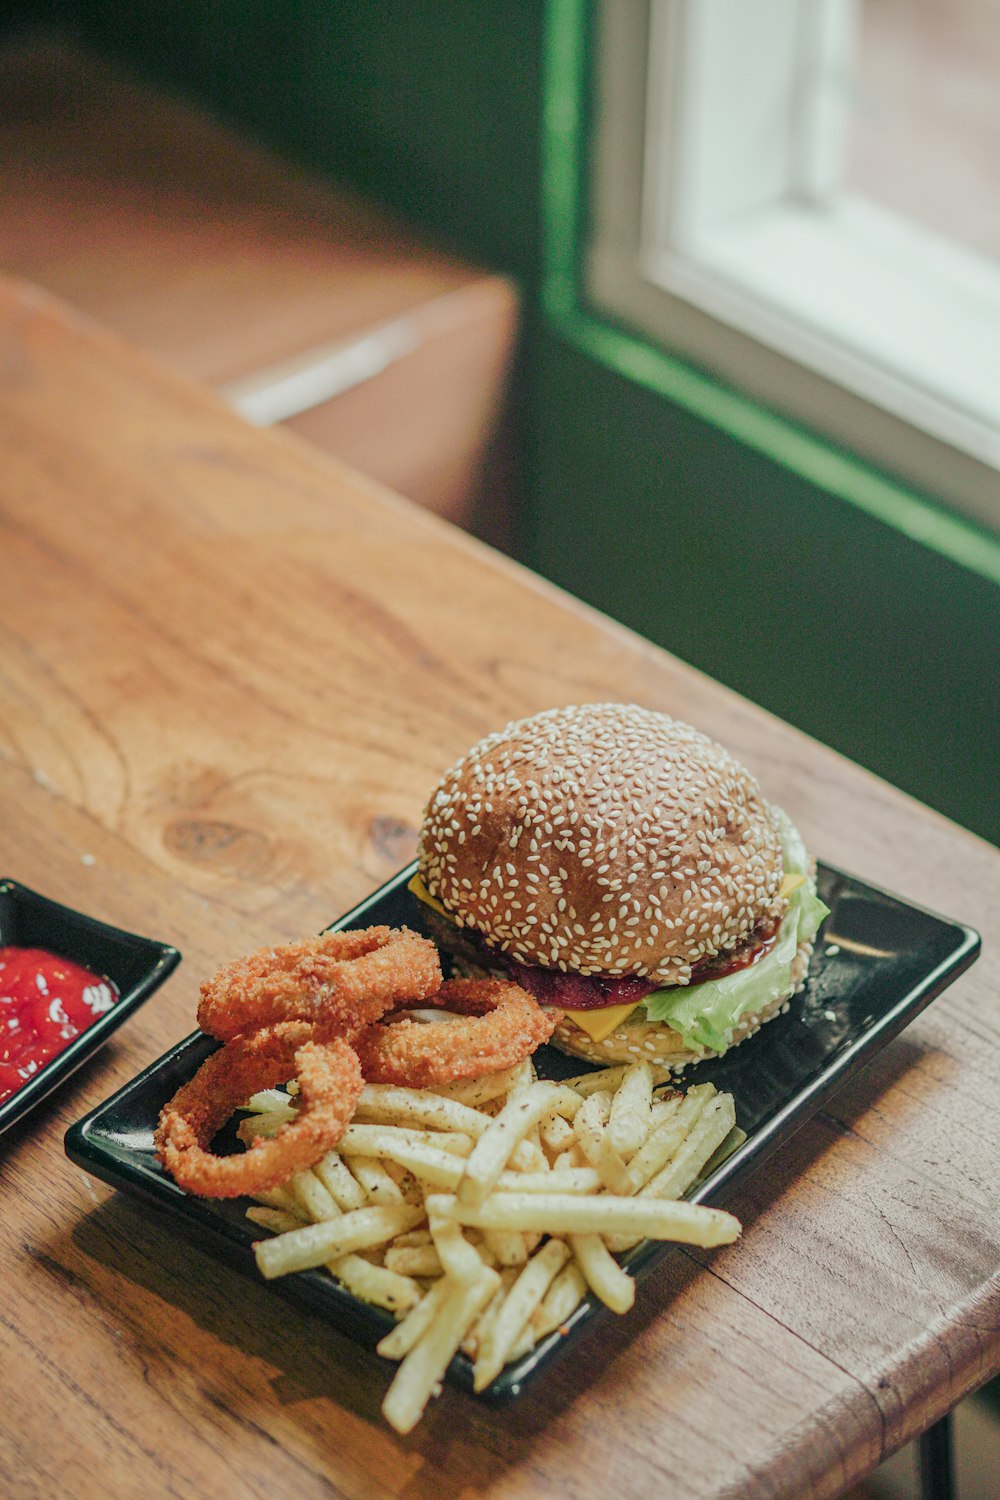 a hamburger and fries on a plate on a table